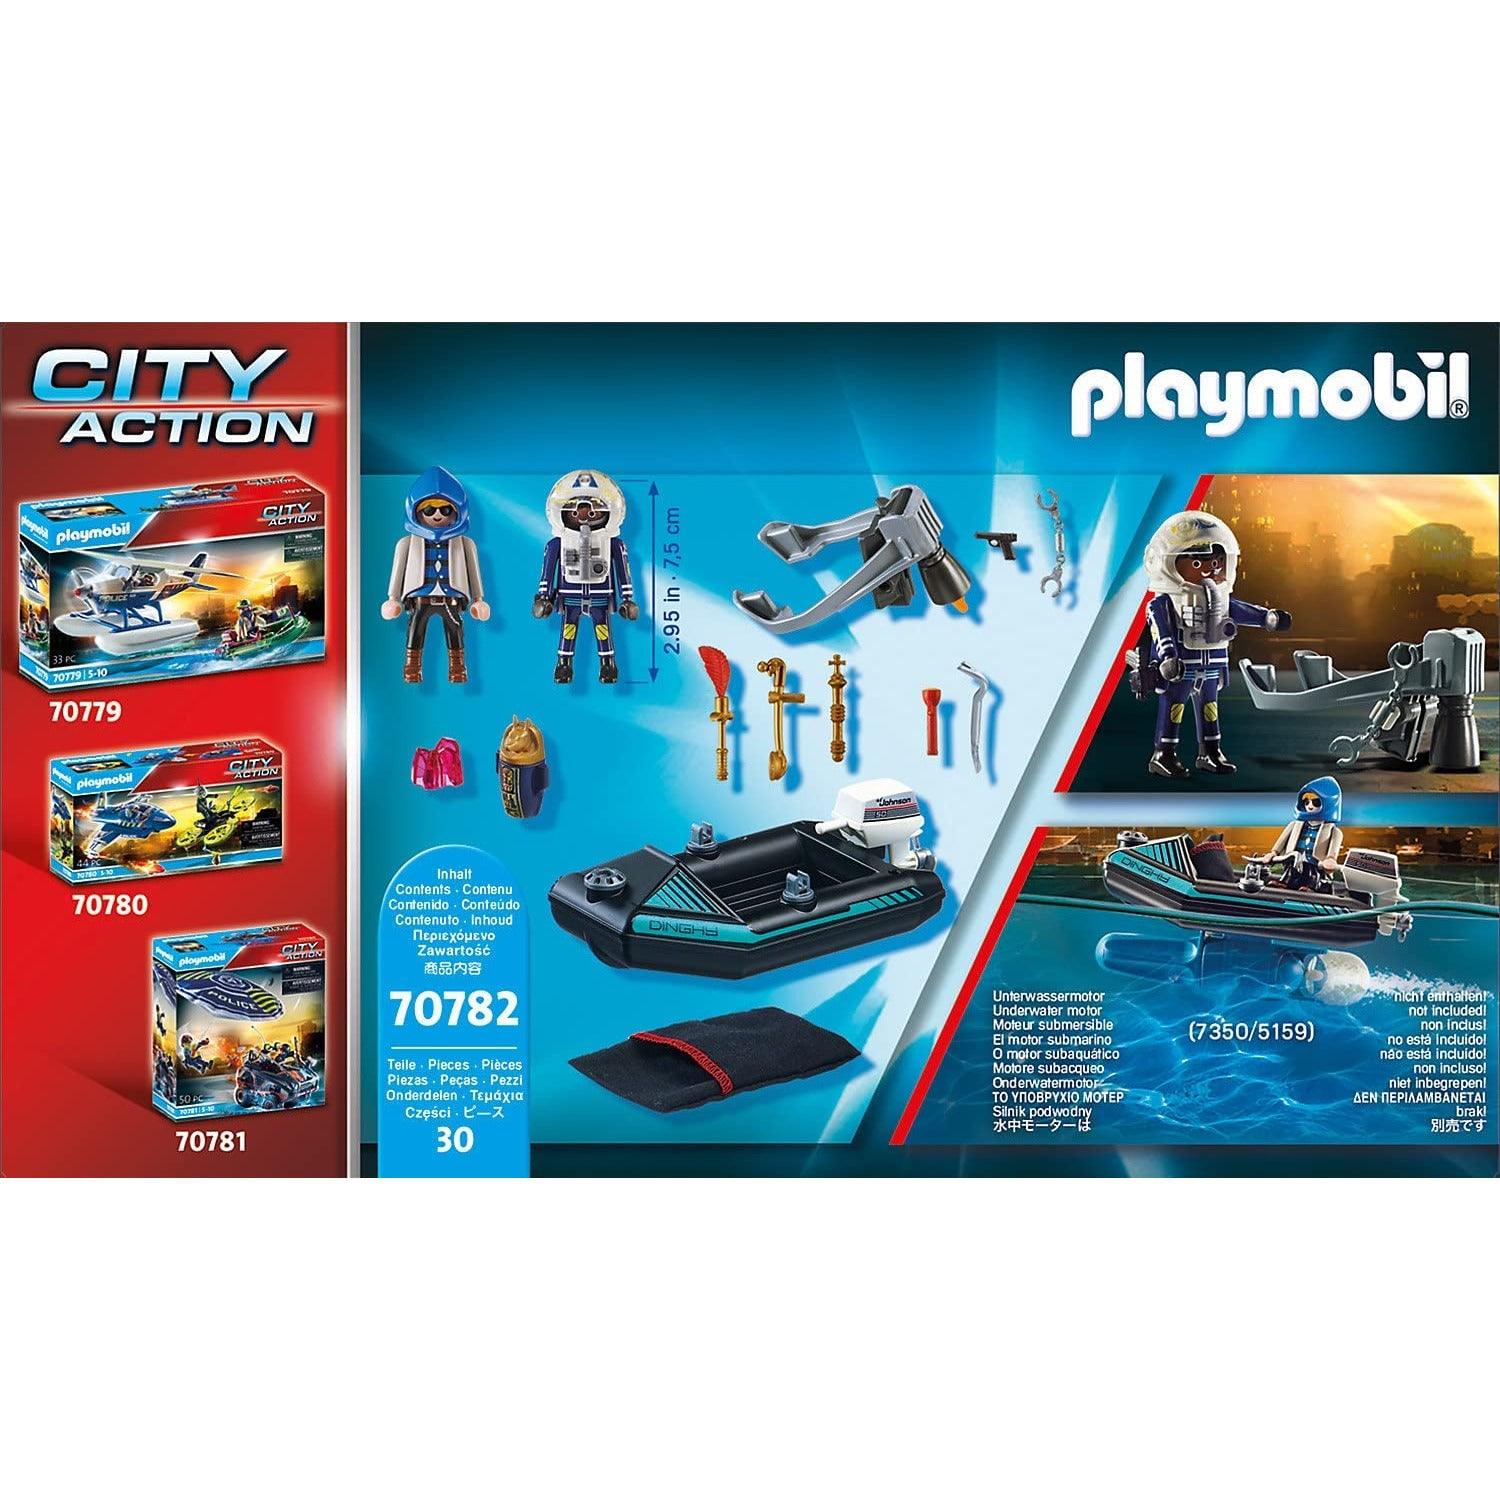 PLAYMOBIL Police Jet Pack with Boat 70782 - BumbleToys - 3+ years, Boys, New Arrivals, playmobil